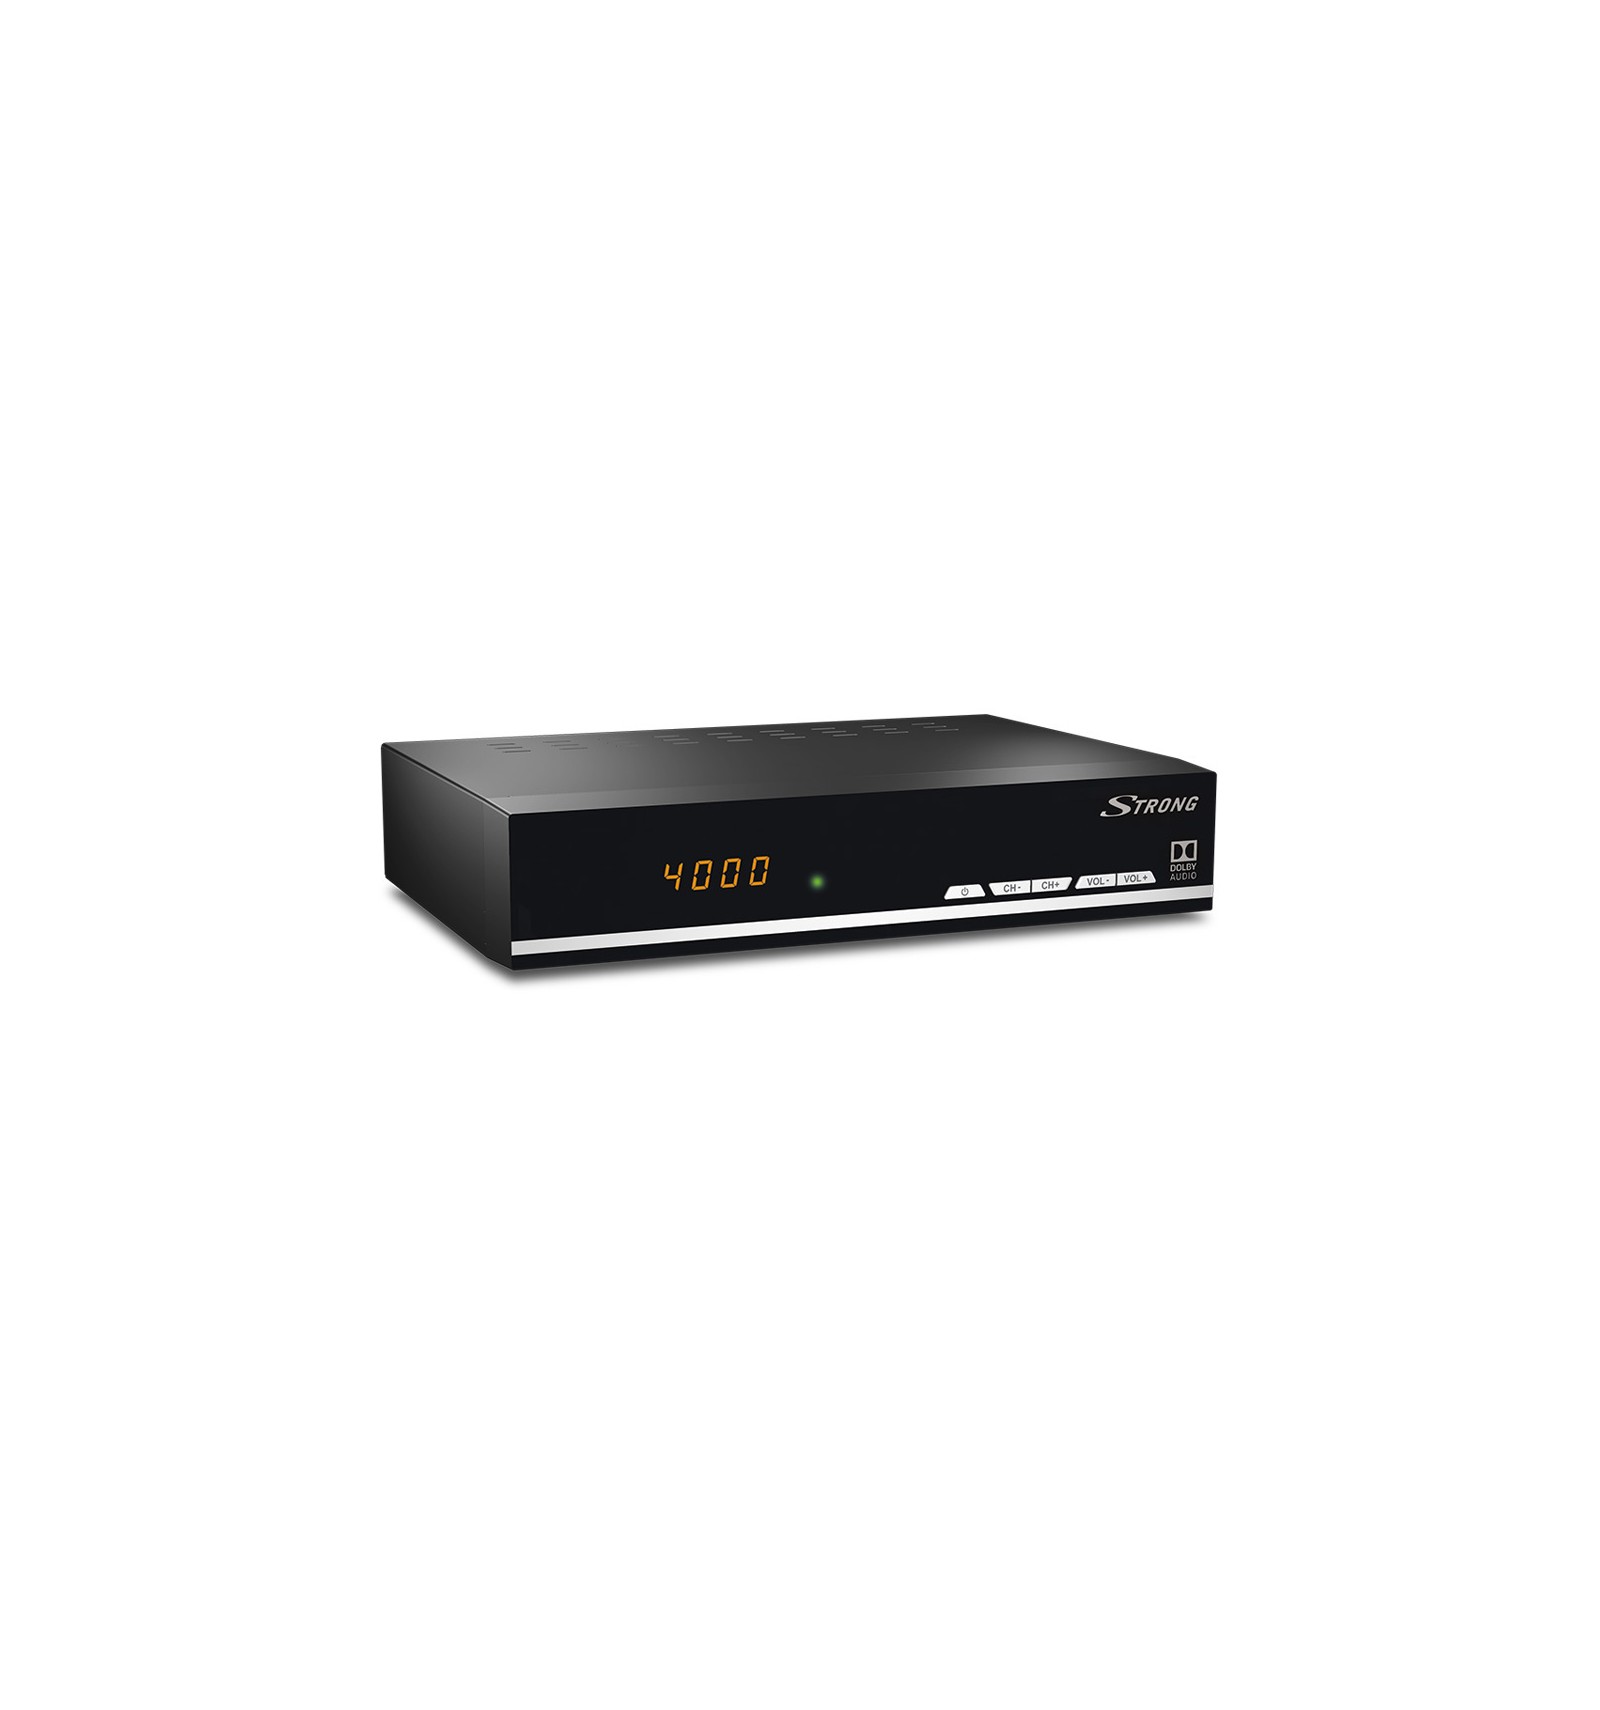 Strong SRT7006 HD Satellite Receiver